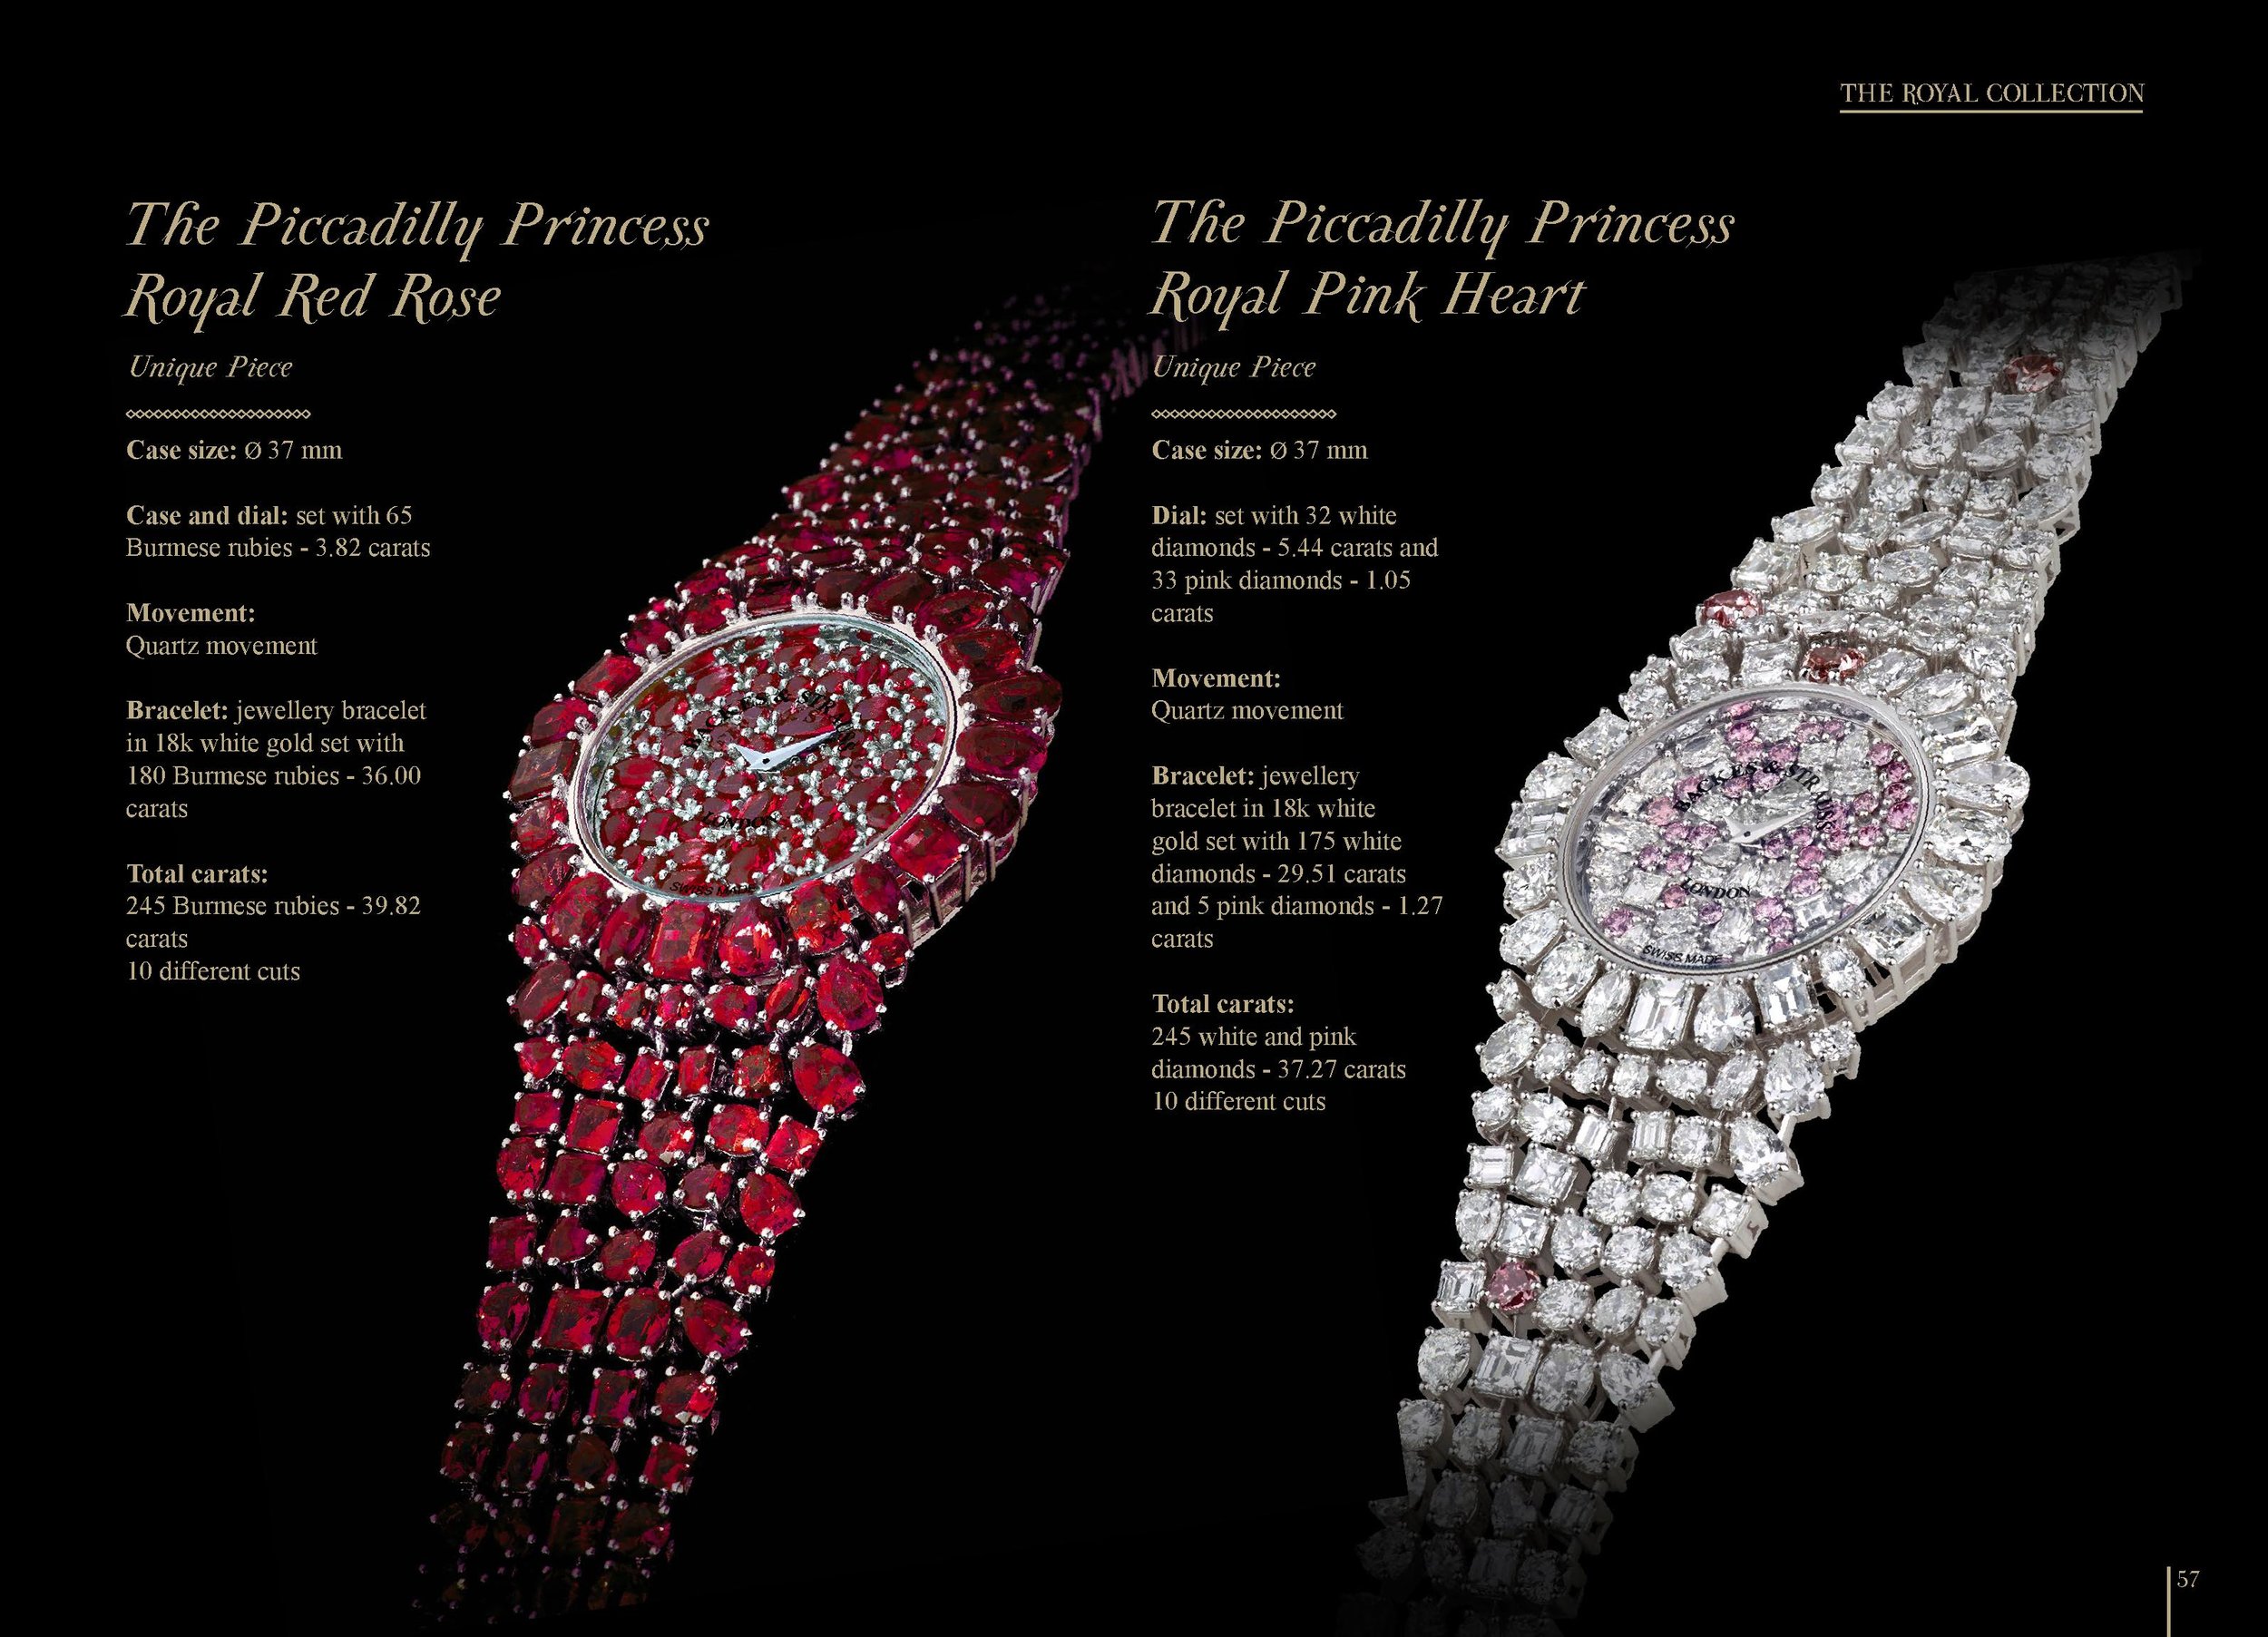 The Piccadilly Princess Royal Red Rose and Pink Heart msaterpiece